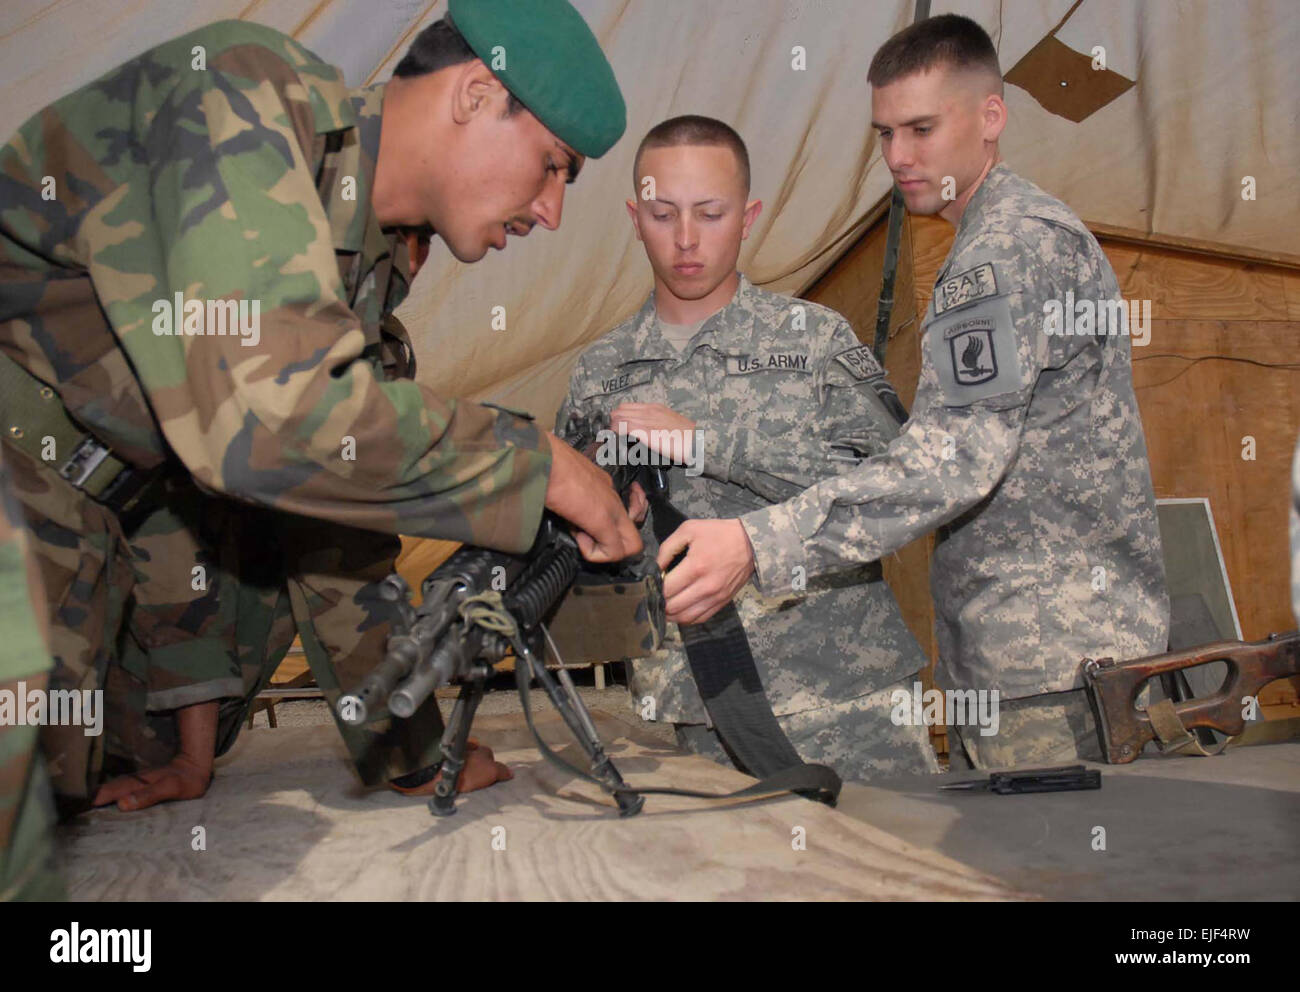 U.S. Army Spcs. Lee Gaskell, right, and Luis Velez-Casianoa, middle, both small-arms artillery repairmen in the armament shop of Bravo Company, 173rd Brigade Support Battalion, show Afghan National Army mechanics how to load an M-249 semi-automatic weapon during a weapons maintenance class on Forward Operating Base Fenty, Afghanistan, March 3, 2008.  2nd Lt. Monika Comeaux Released Stock Photo